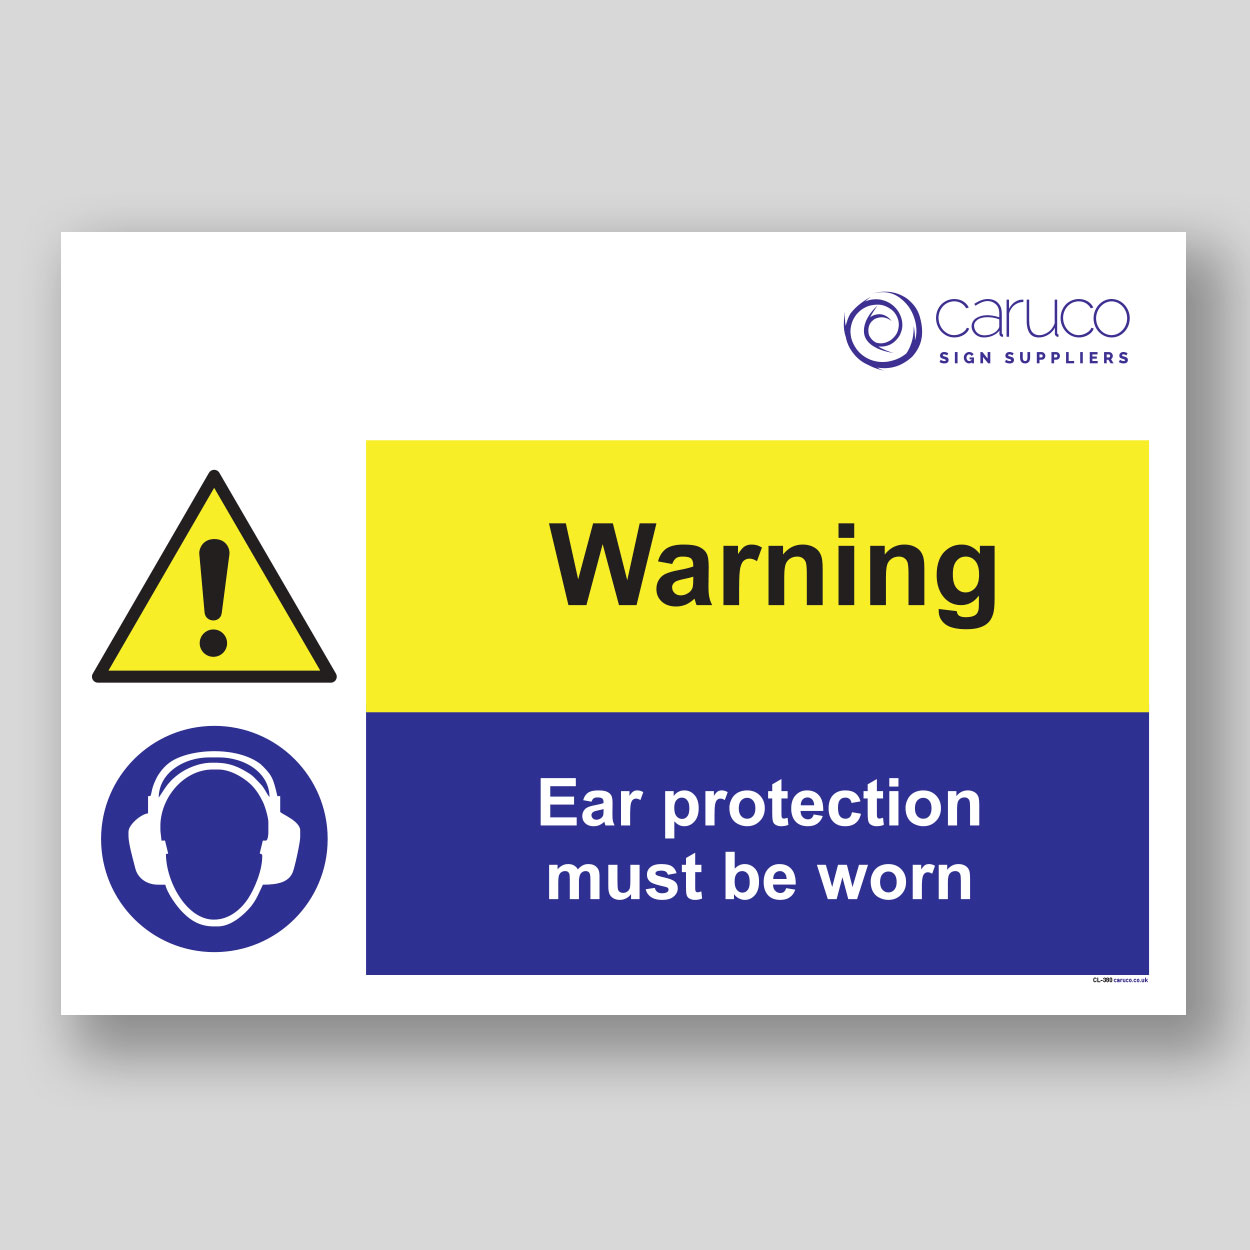 CL-380 Warning - ear protection